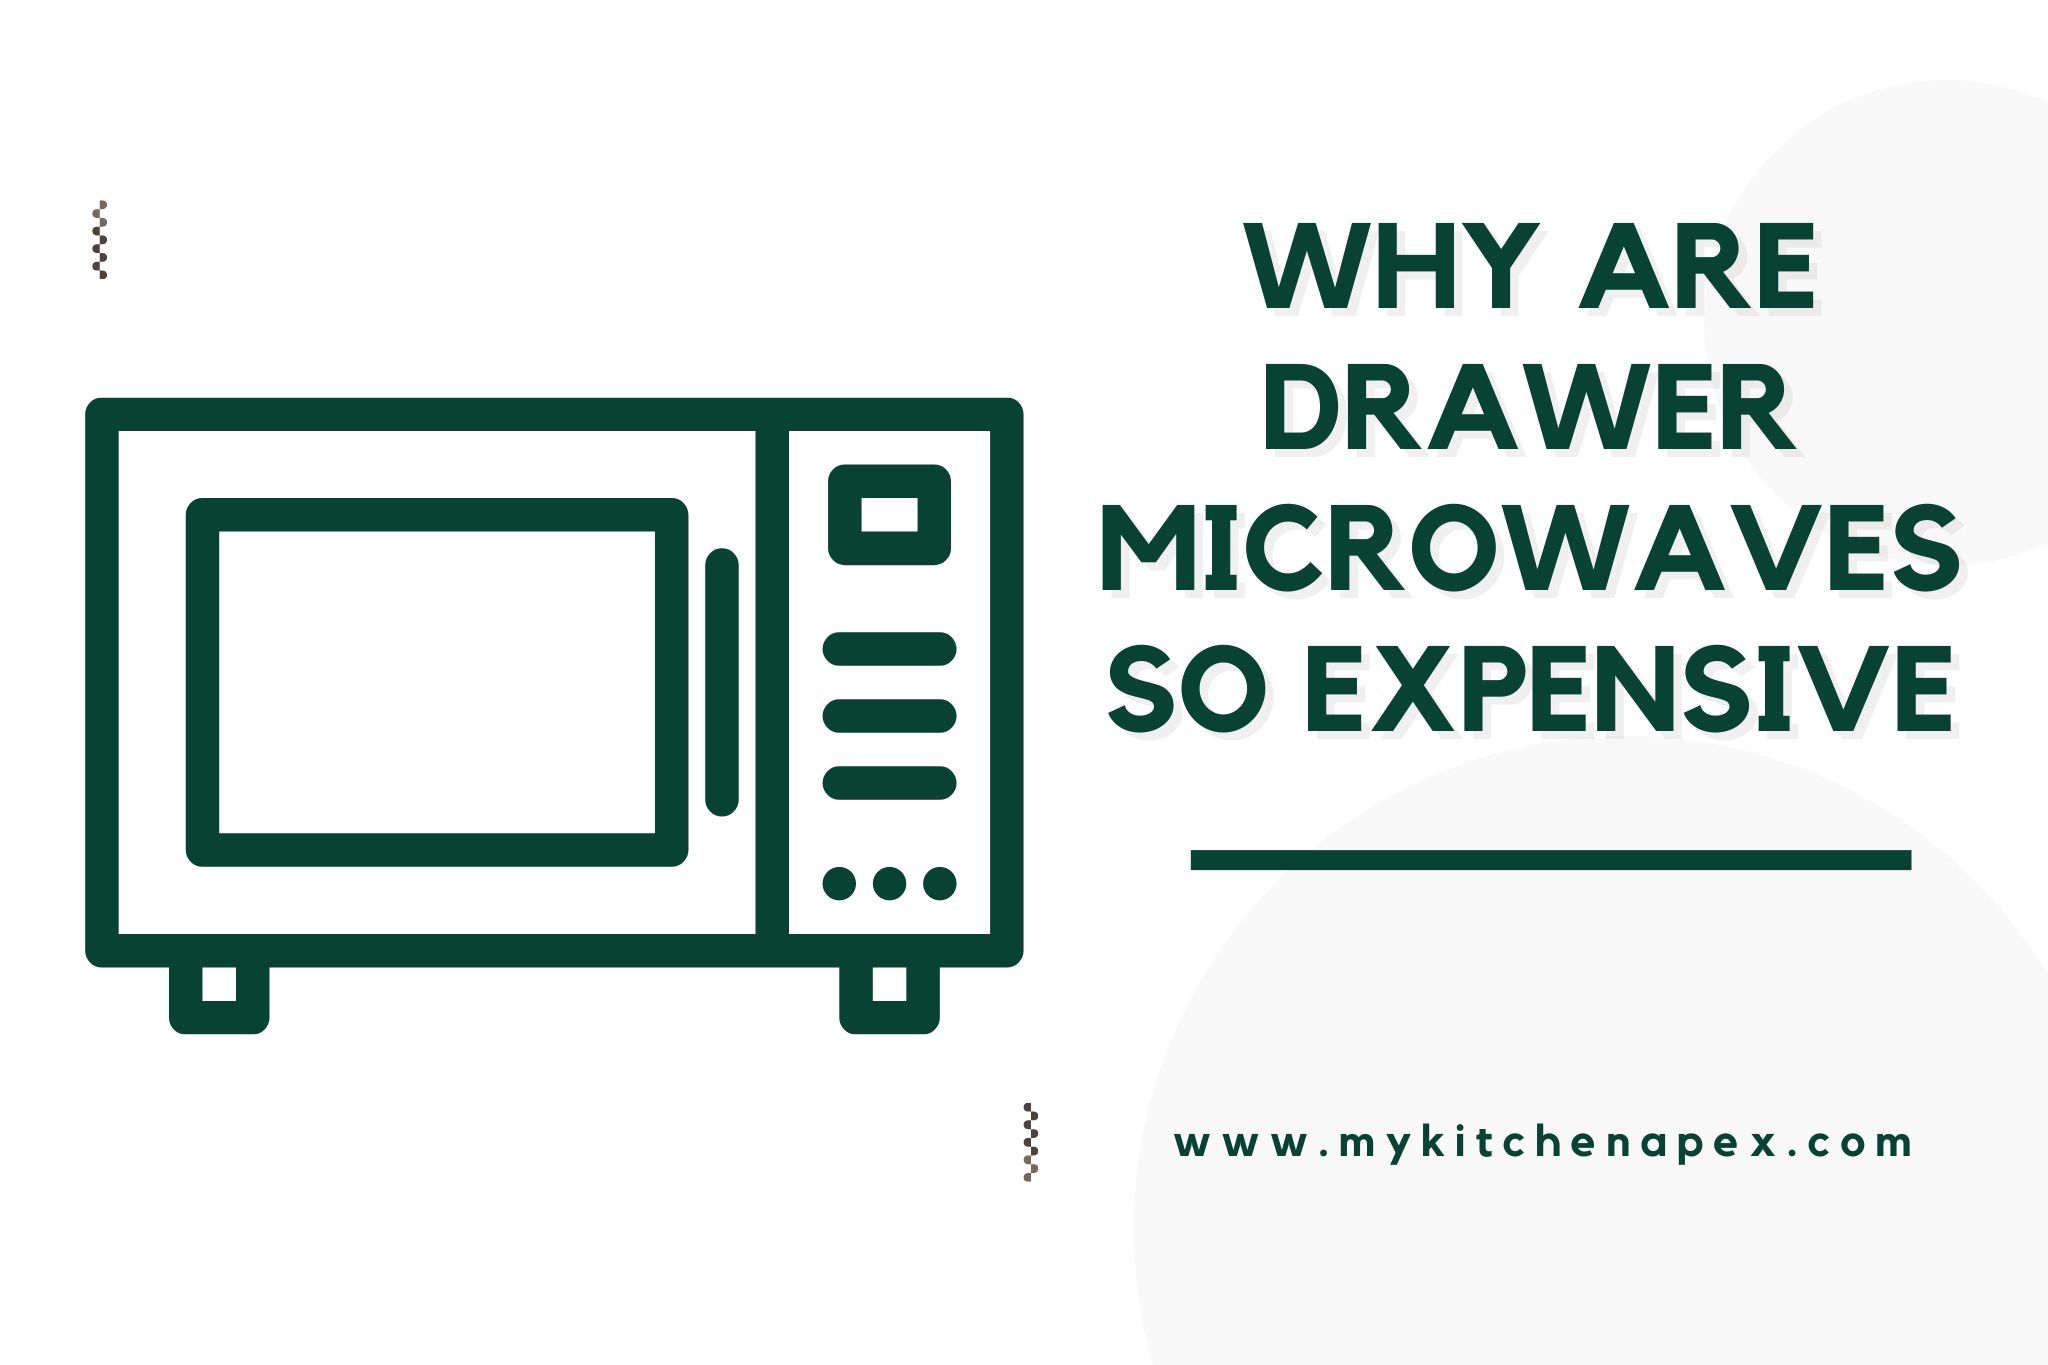 why are drawer microwaves so expensive